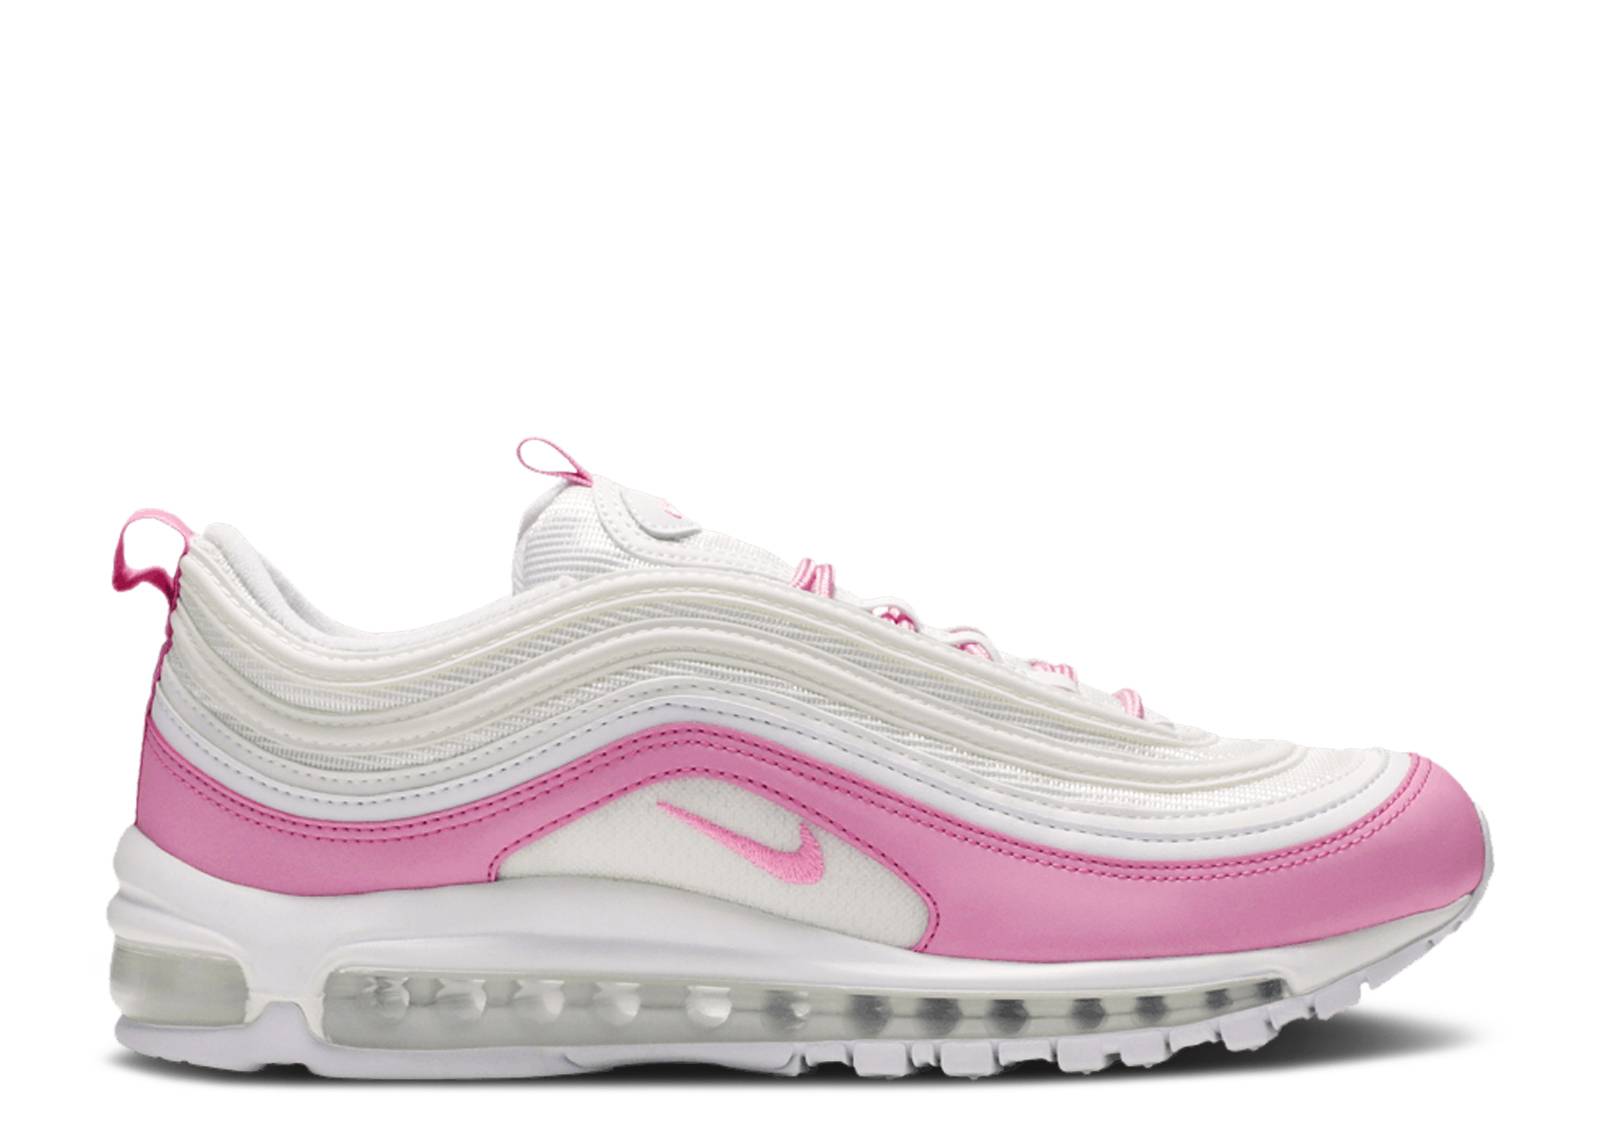 Wmns Air Max 97 'Psychic Pink'